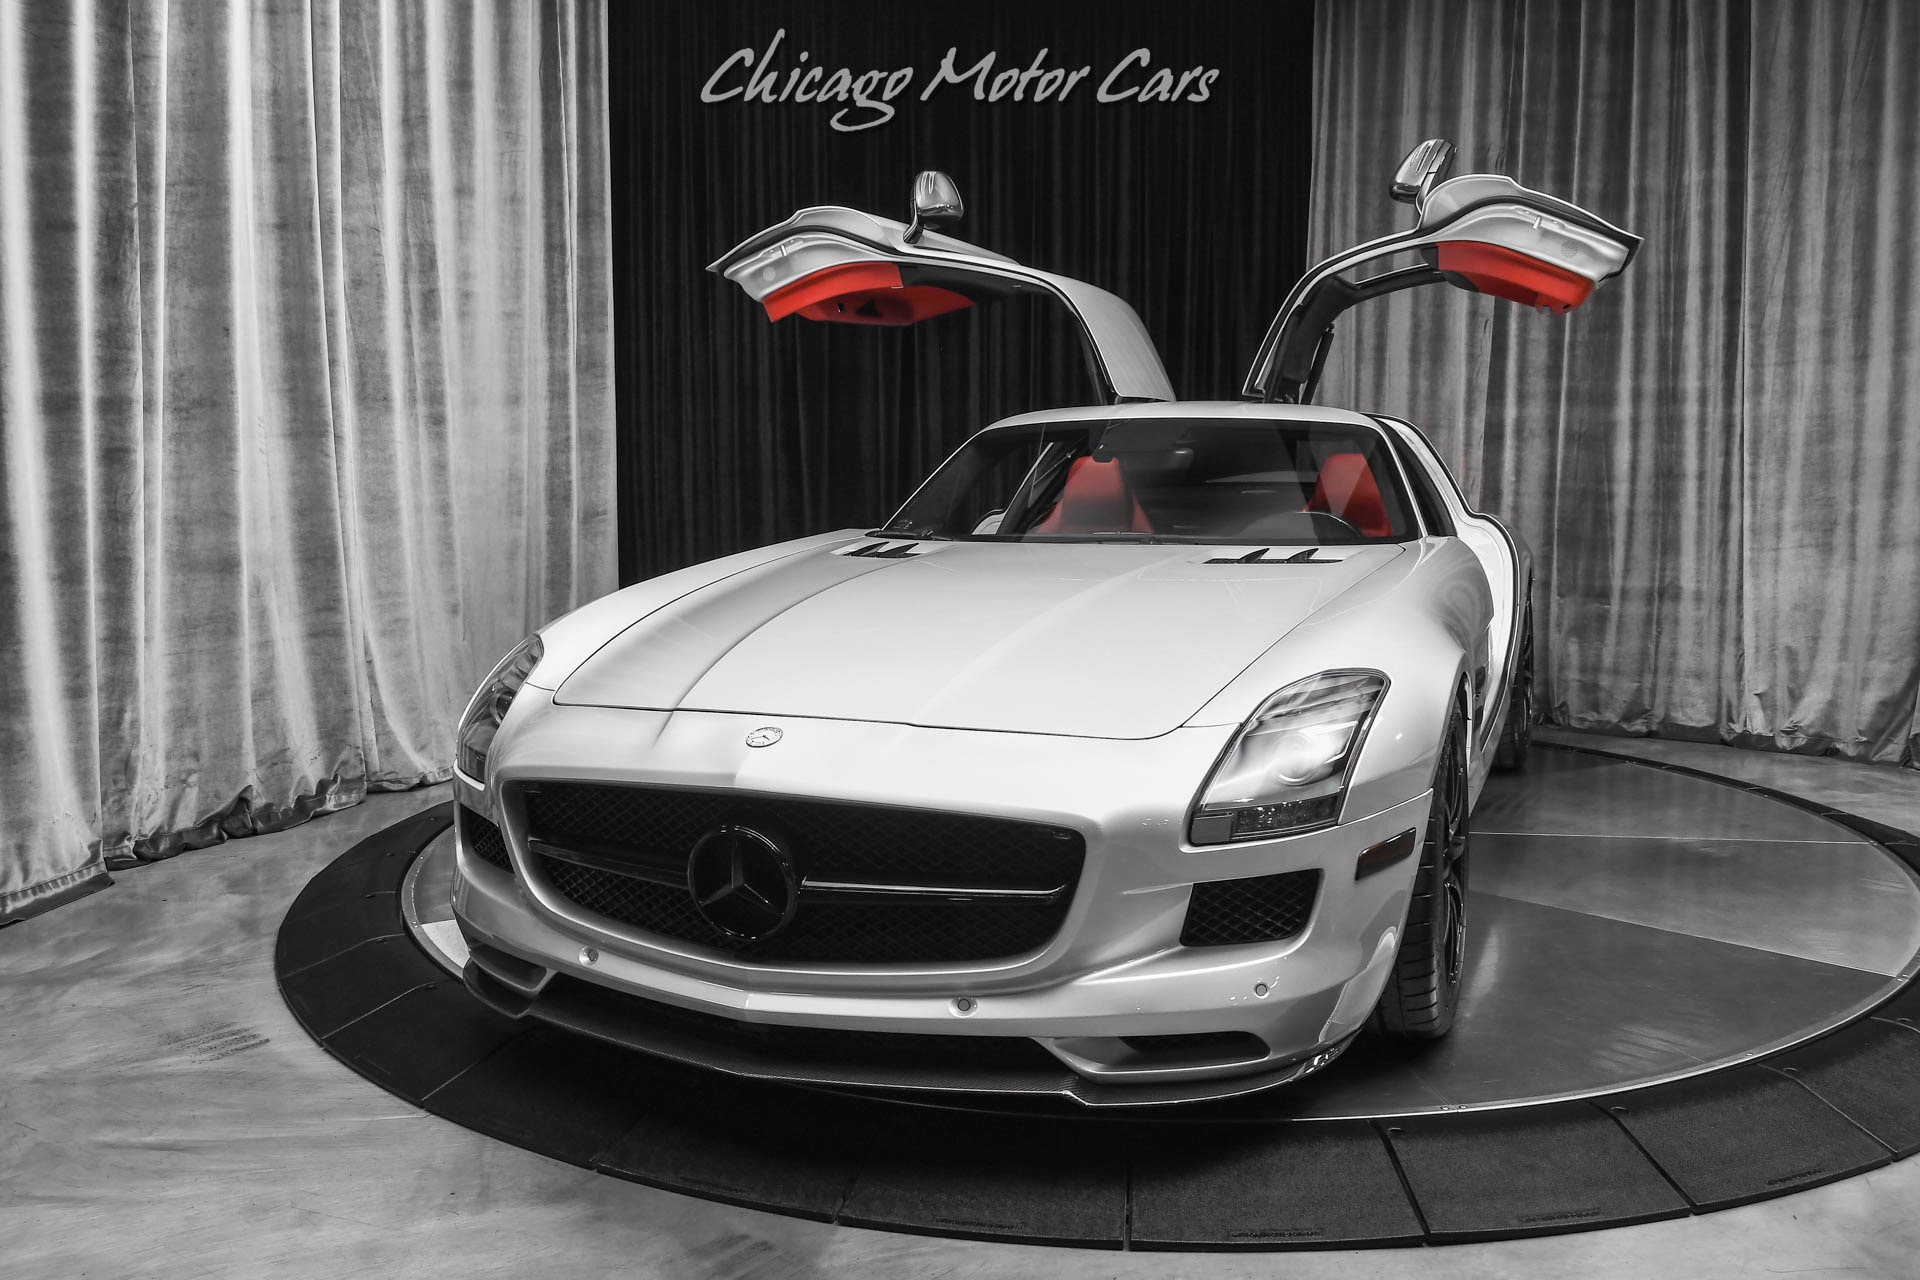 Used-2011-Mercedes-Benz-SLS-AMG-Gullwing-Coupe-RARE-HOT-Spec-TONS-of-Carbon-AMG-Suspension-Front-PPF